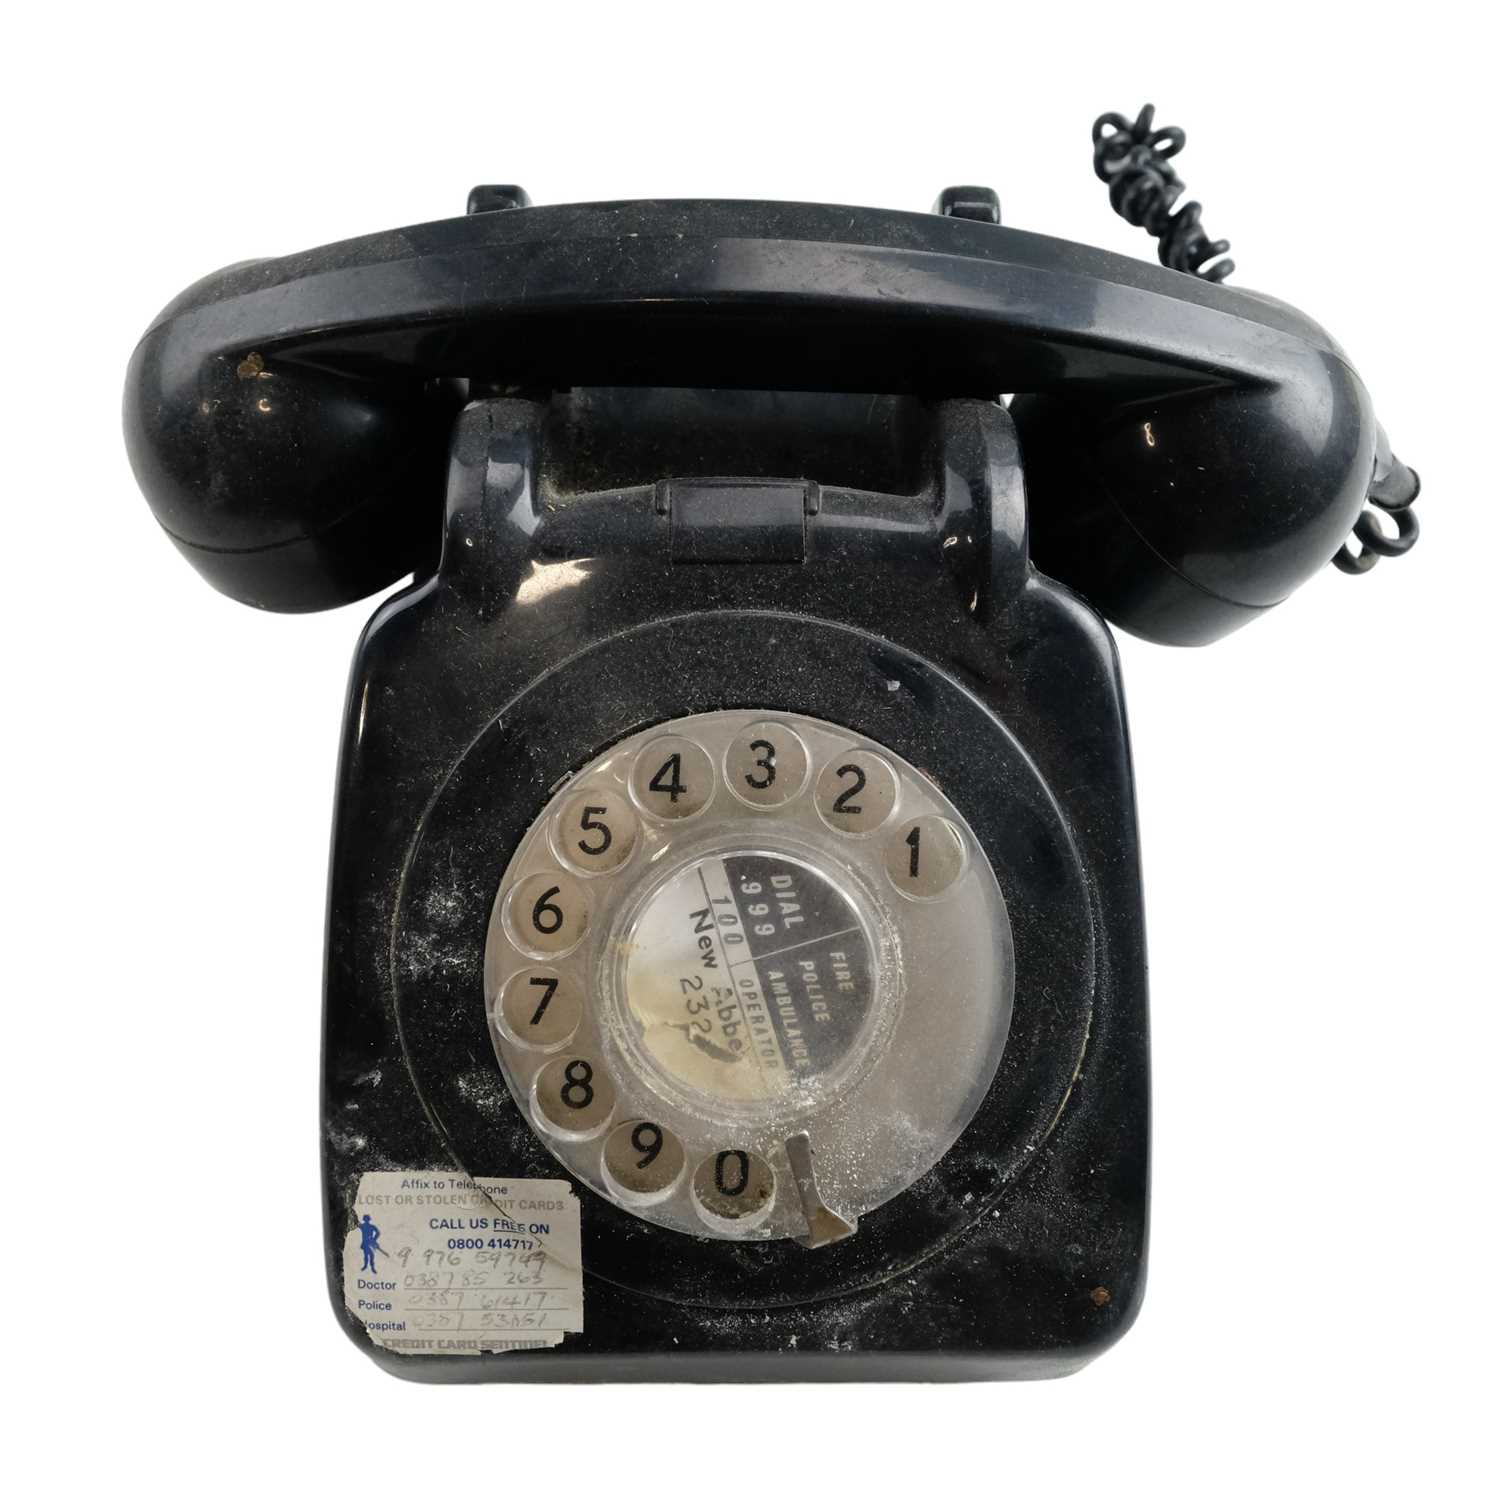 Eight 700 series rotary dial telephones, models 706 L, 706 F, 746 GNA and 746 GEN - Image 7 of 9